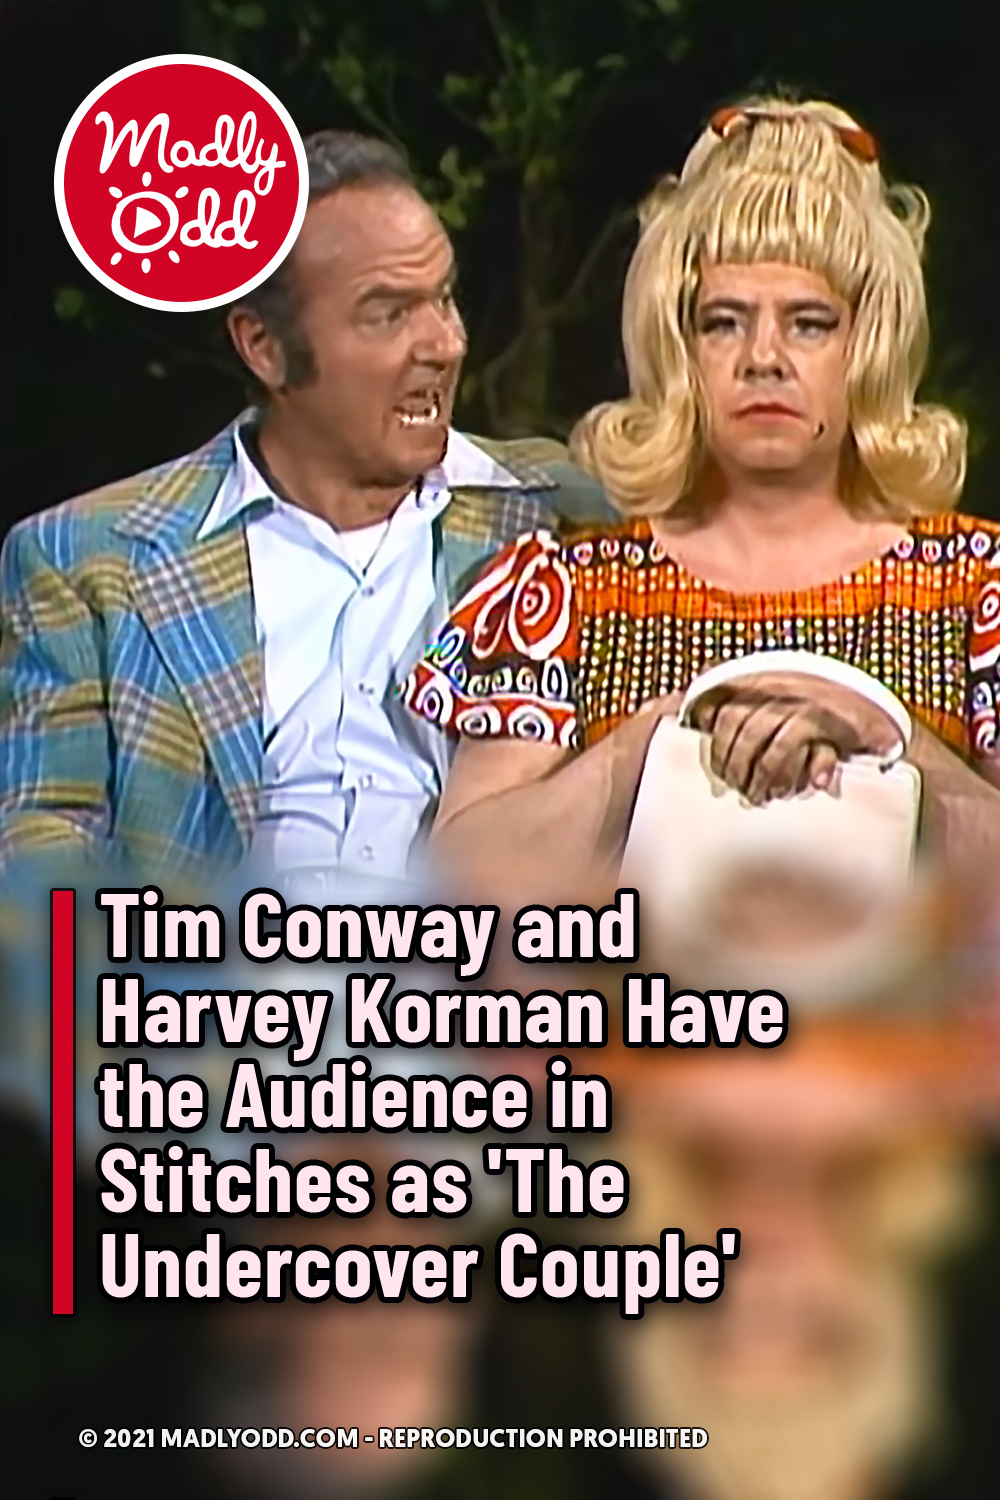 Tim Conway and Harvey Korman Have the Audience in Stitches as \'The Undercover Couple\'